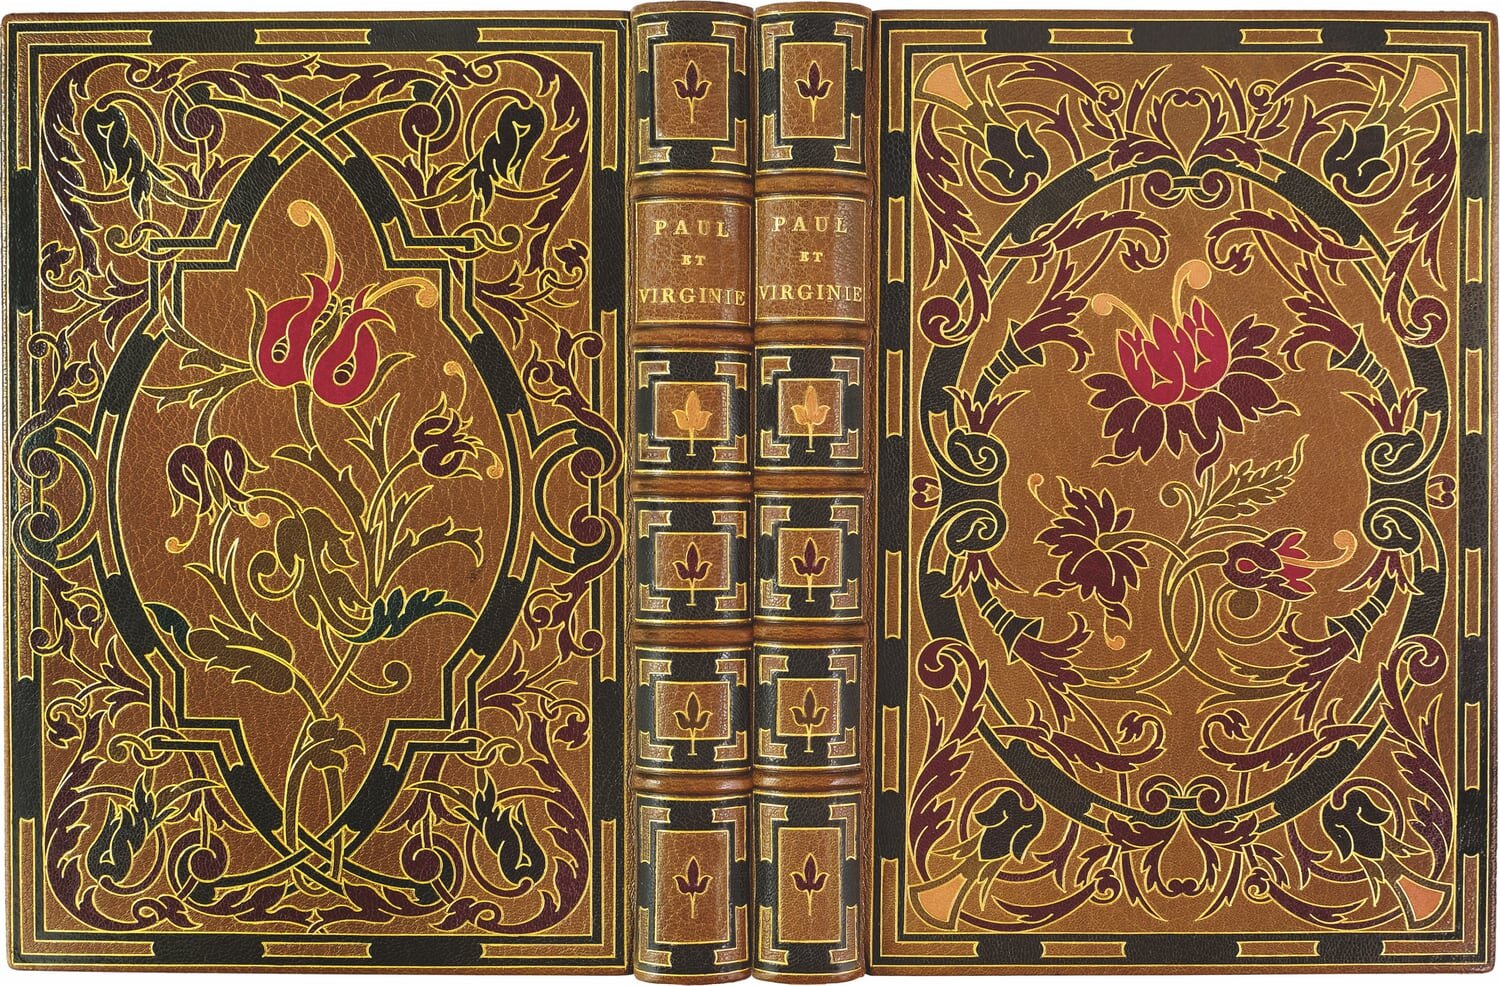  The most beautiful copy known [no. 60], on large China paper, bound by Henri Marius Michel in two volumes with floral-ornamental mosaic bindings: this volume not only includes all plates in variants, but also roughly half of all the text illustratio